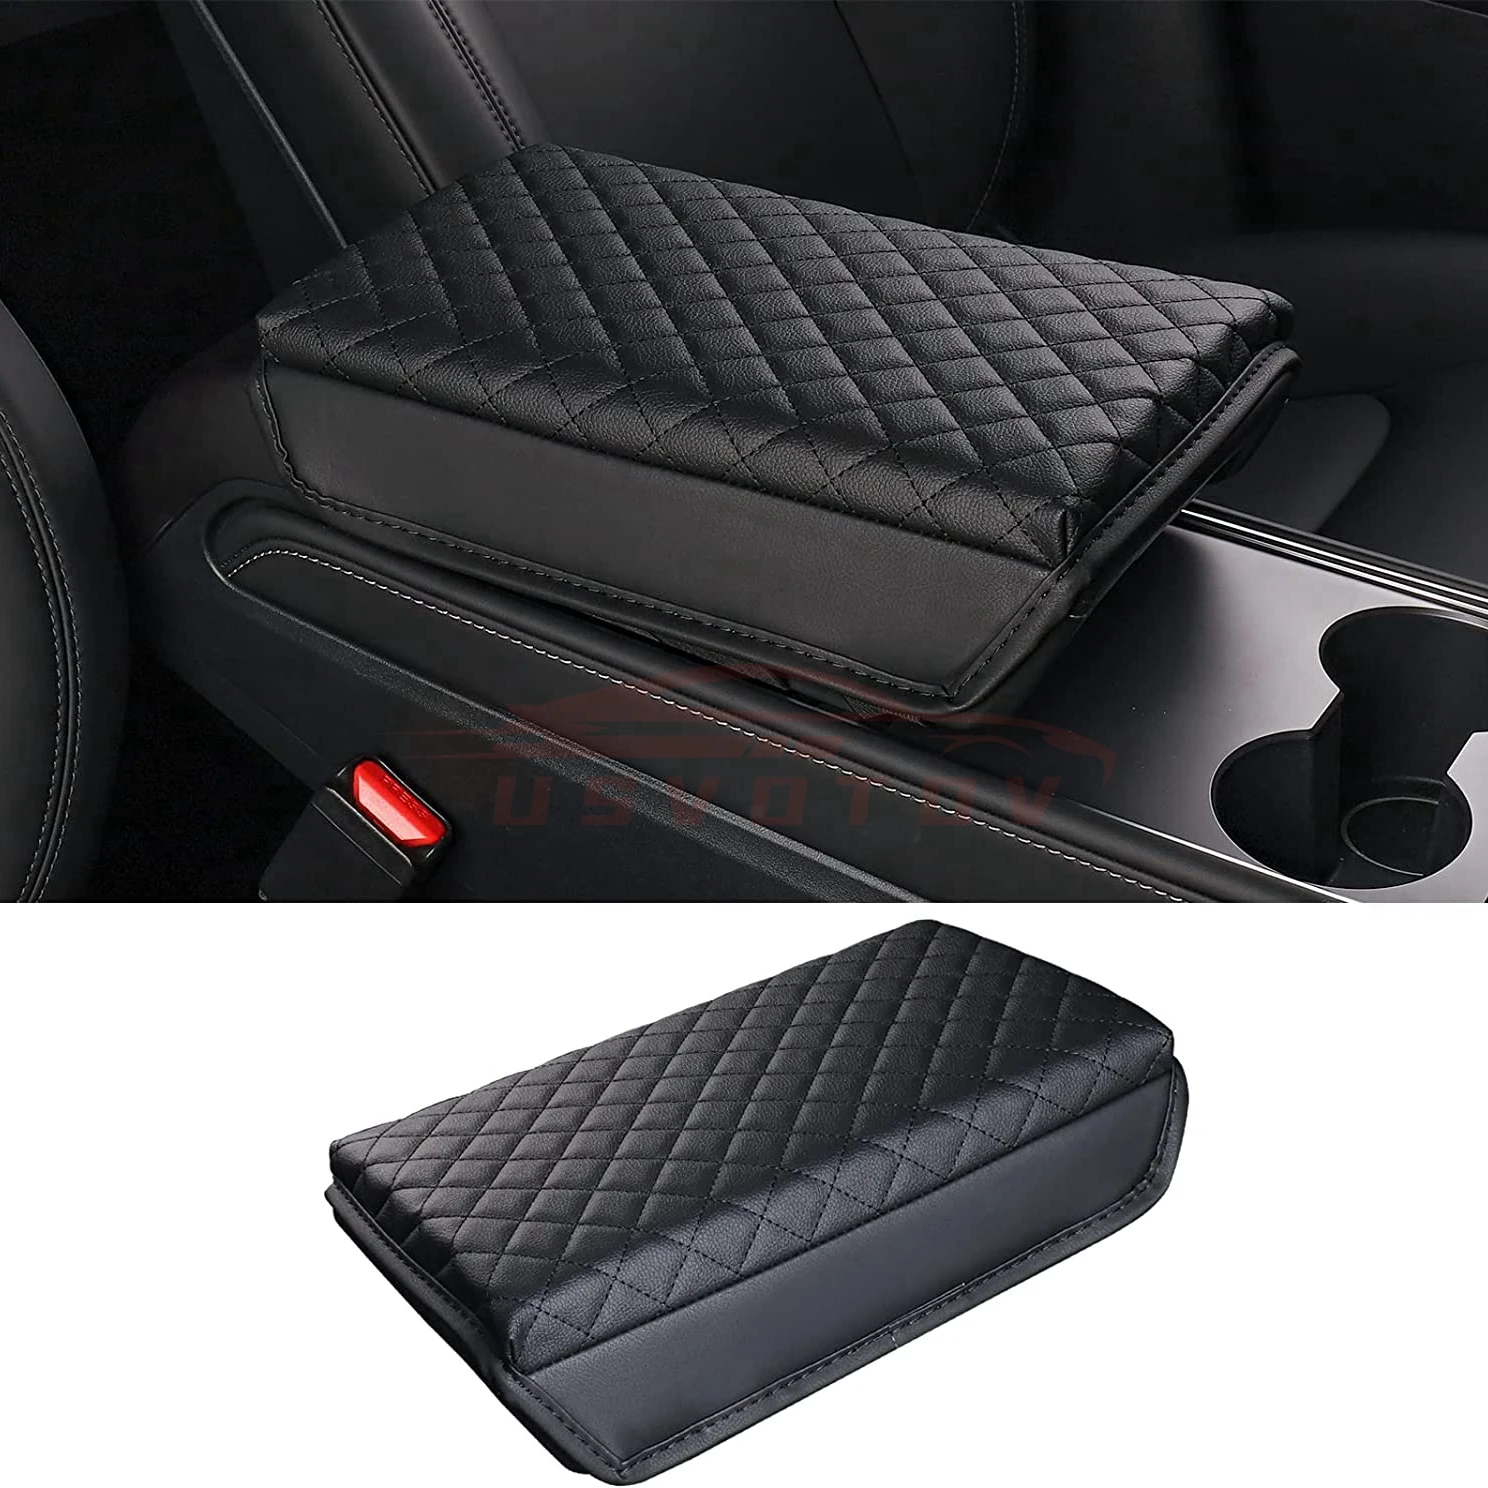 USVOTOV PU Leather Armrest Cover For Tesla Model 3 Y Center Console Protector Arm Rest Cushion Box Pad Car Accessories